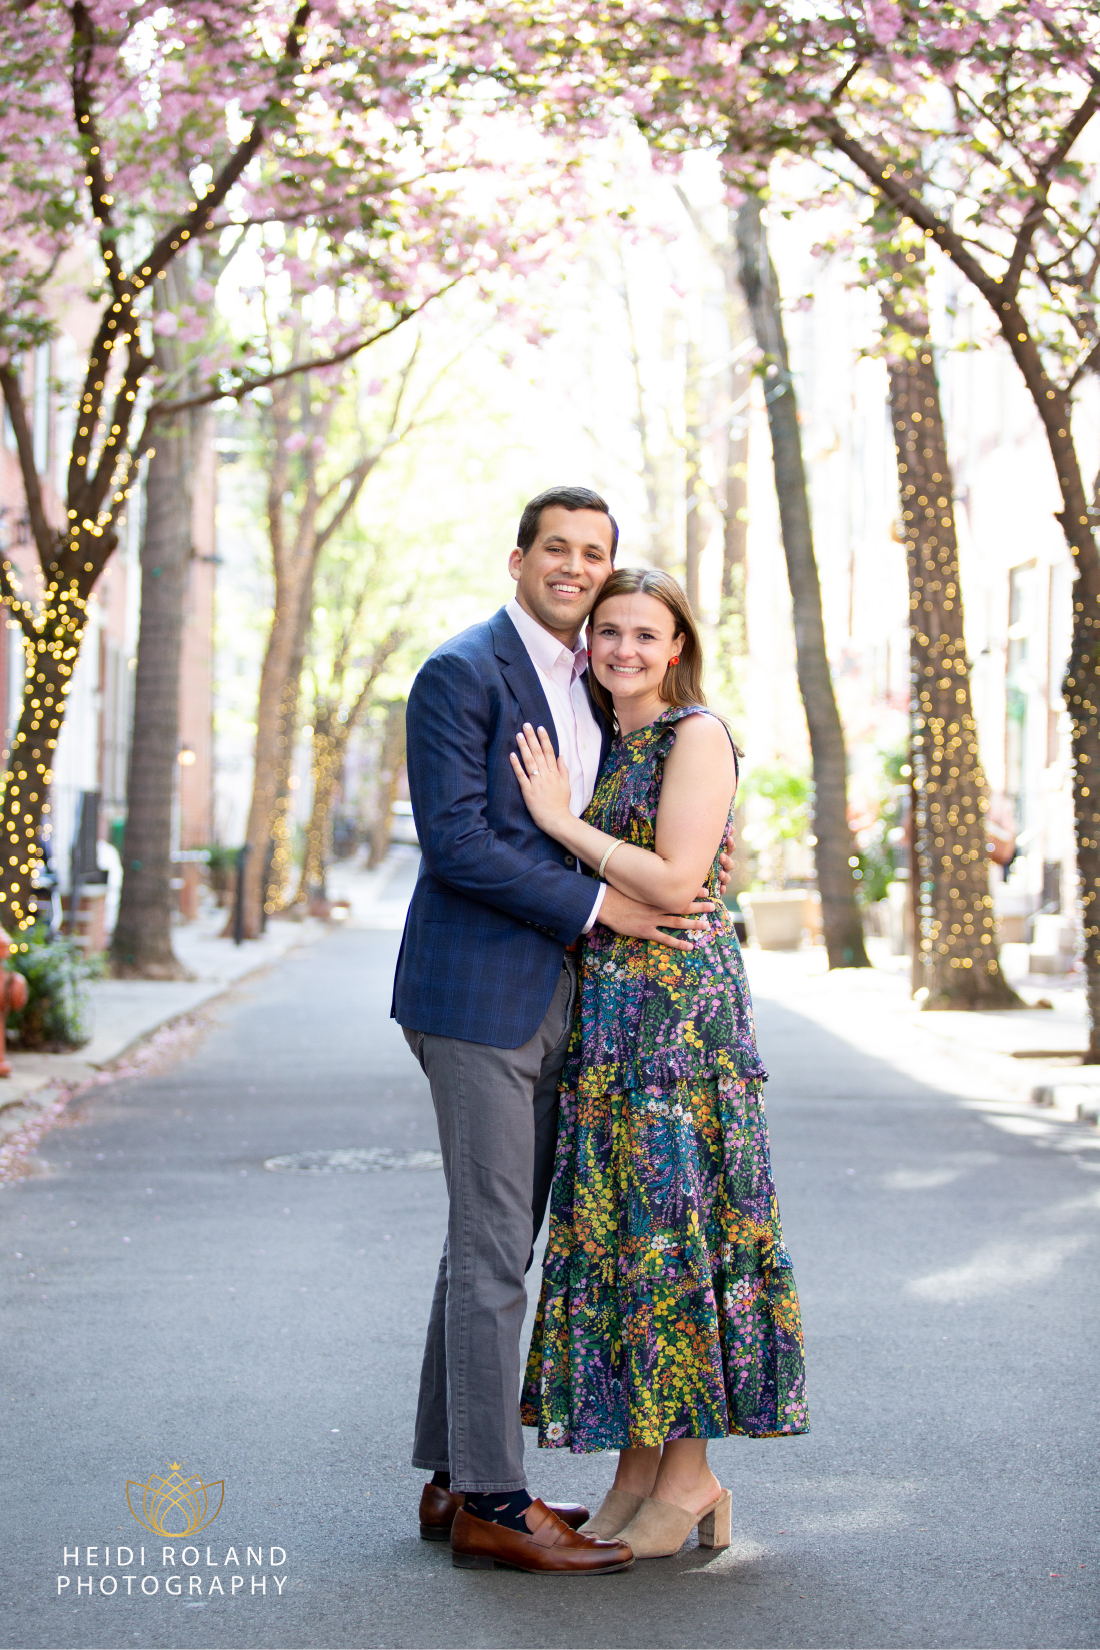 Newly engaged couple on Addison Street in philadelphia surrounded by cherry blossoms by Heidi Roland Photography